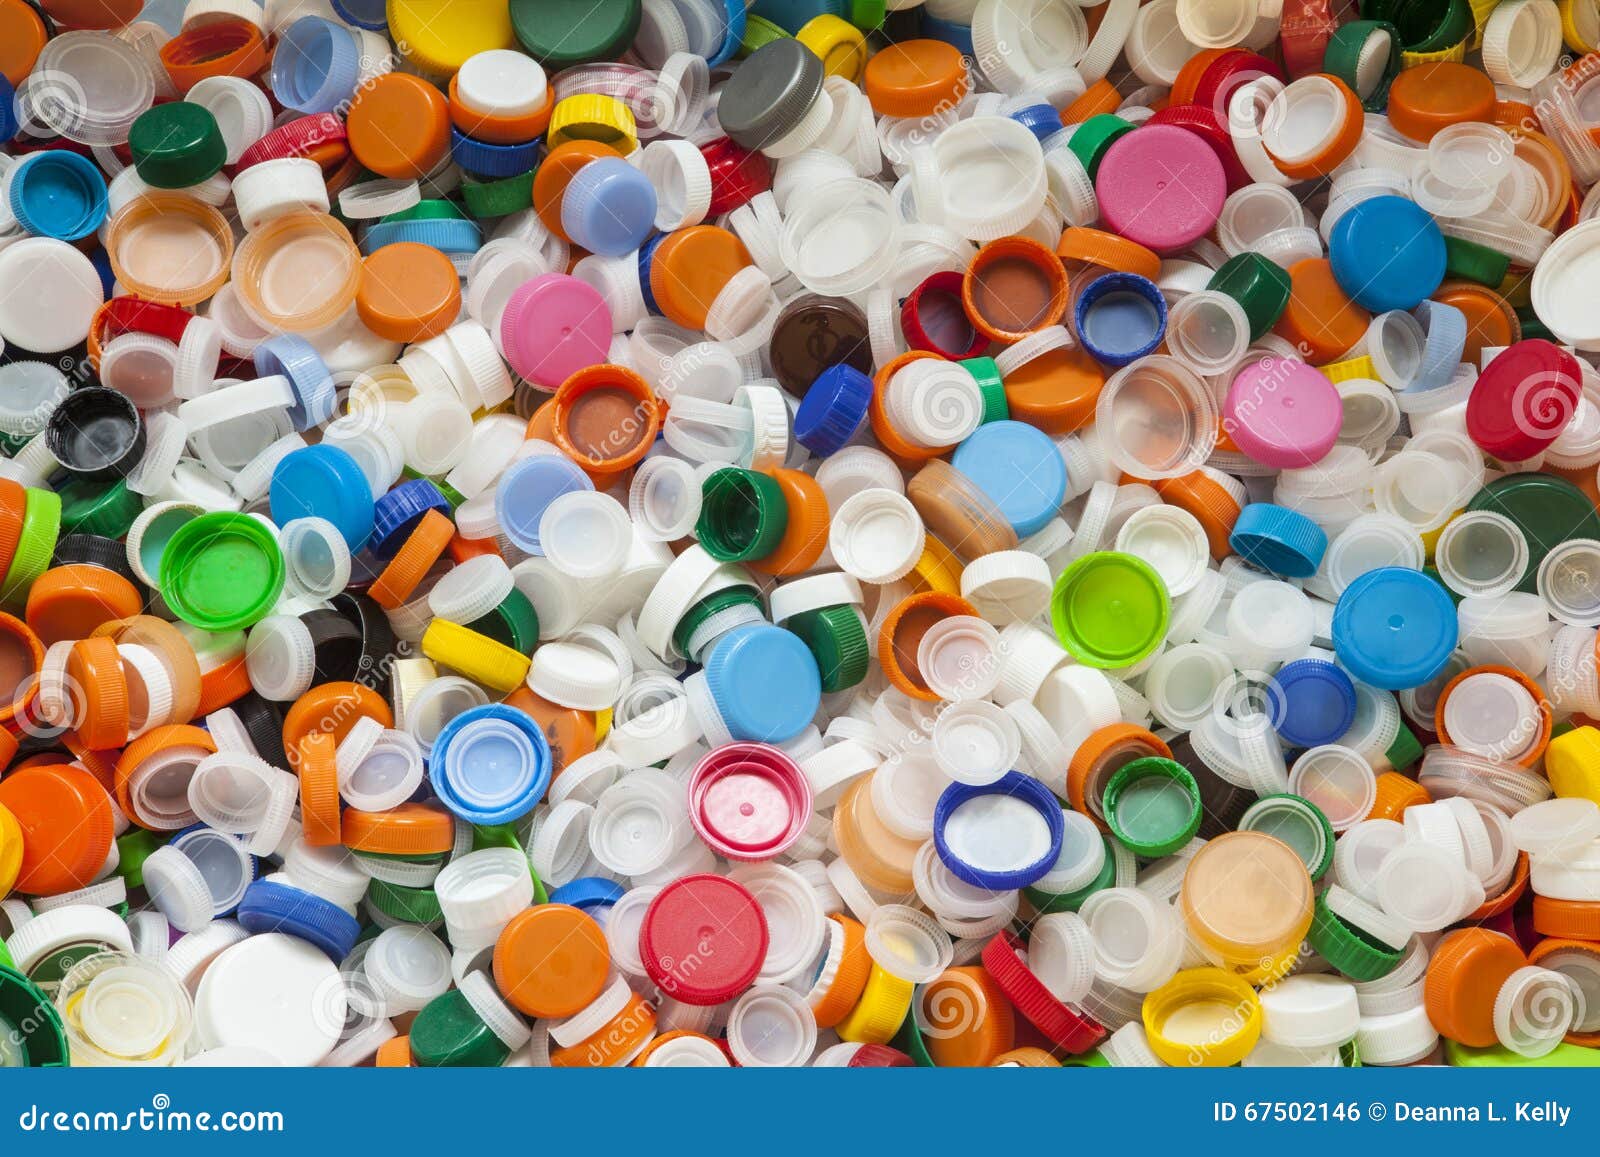 hundreds of brightly colored plastic bottle caps